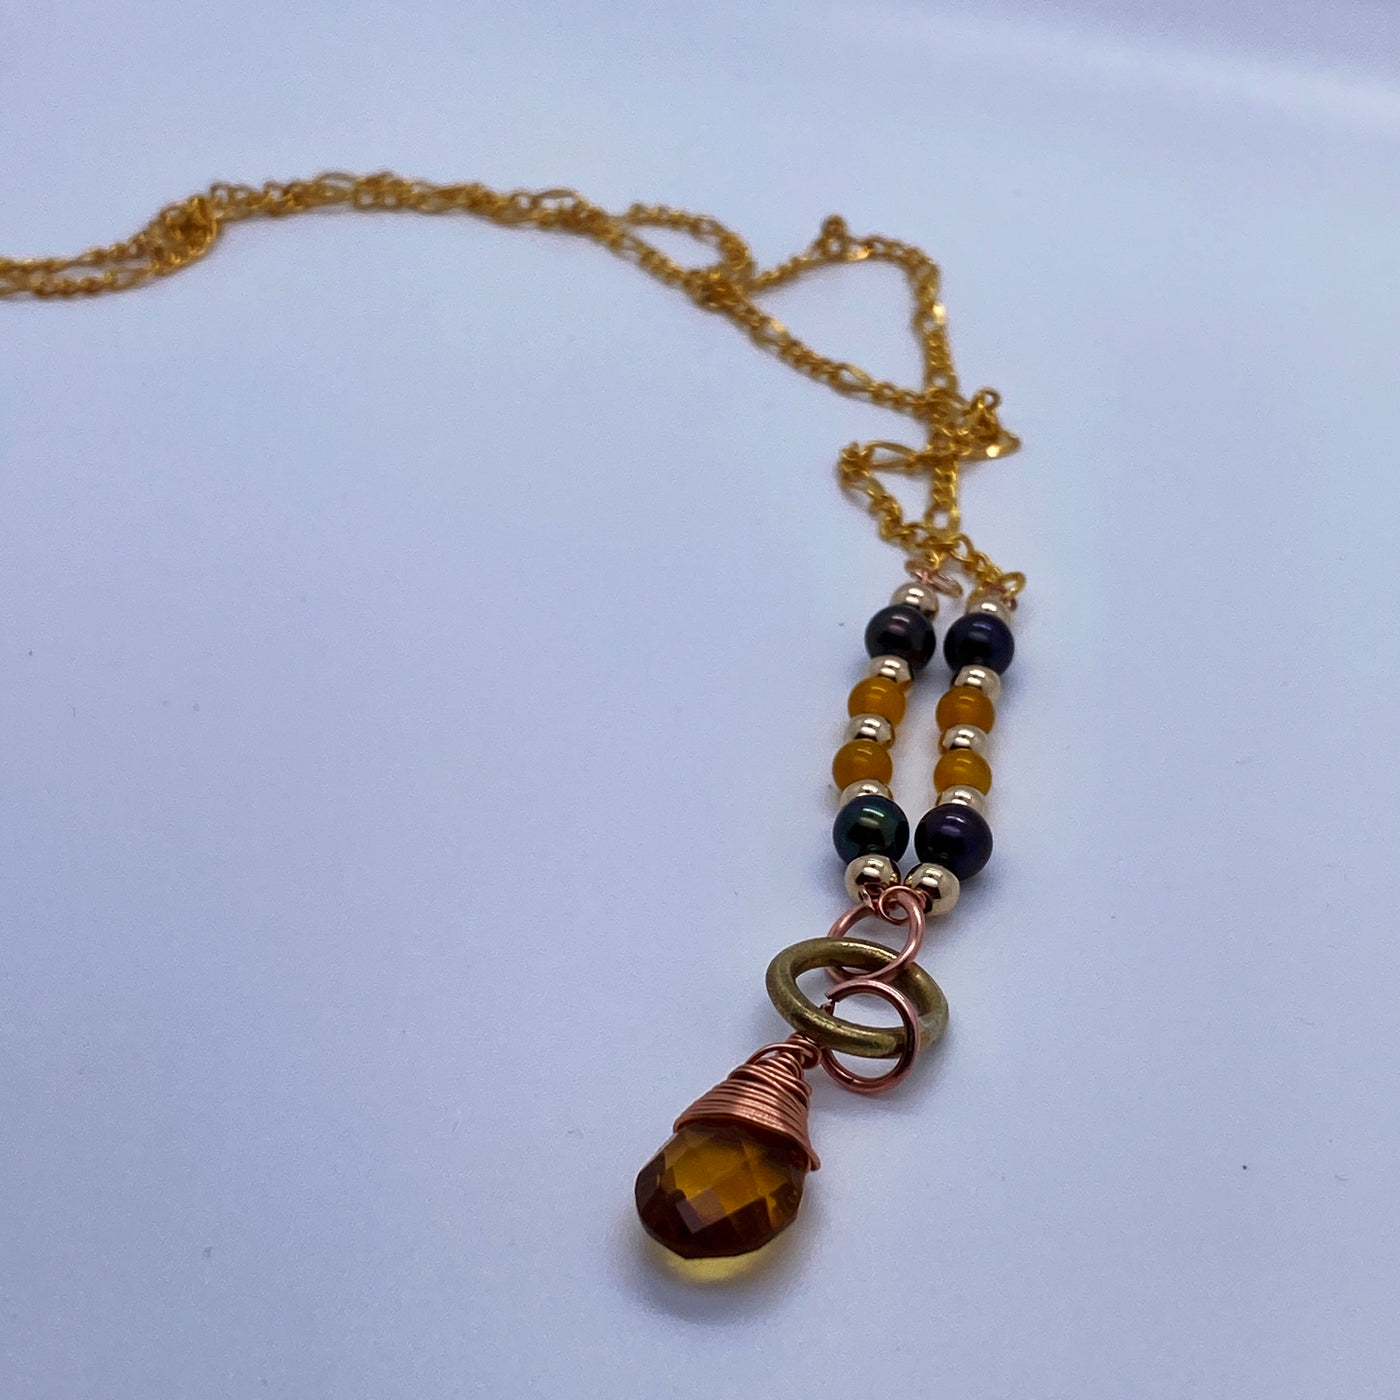 Ravens’ wing pearls, yellow agate and citrine briolette pendant